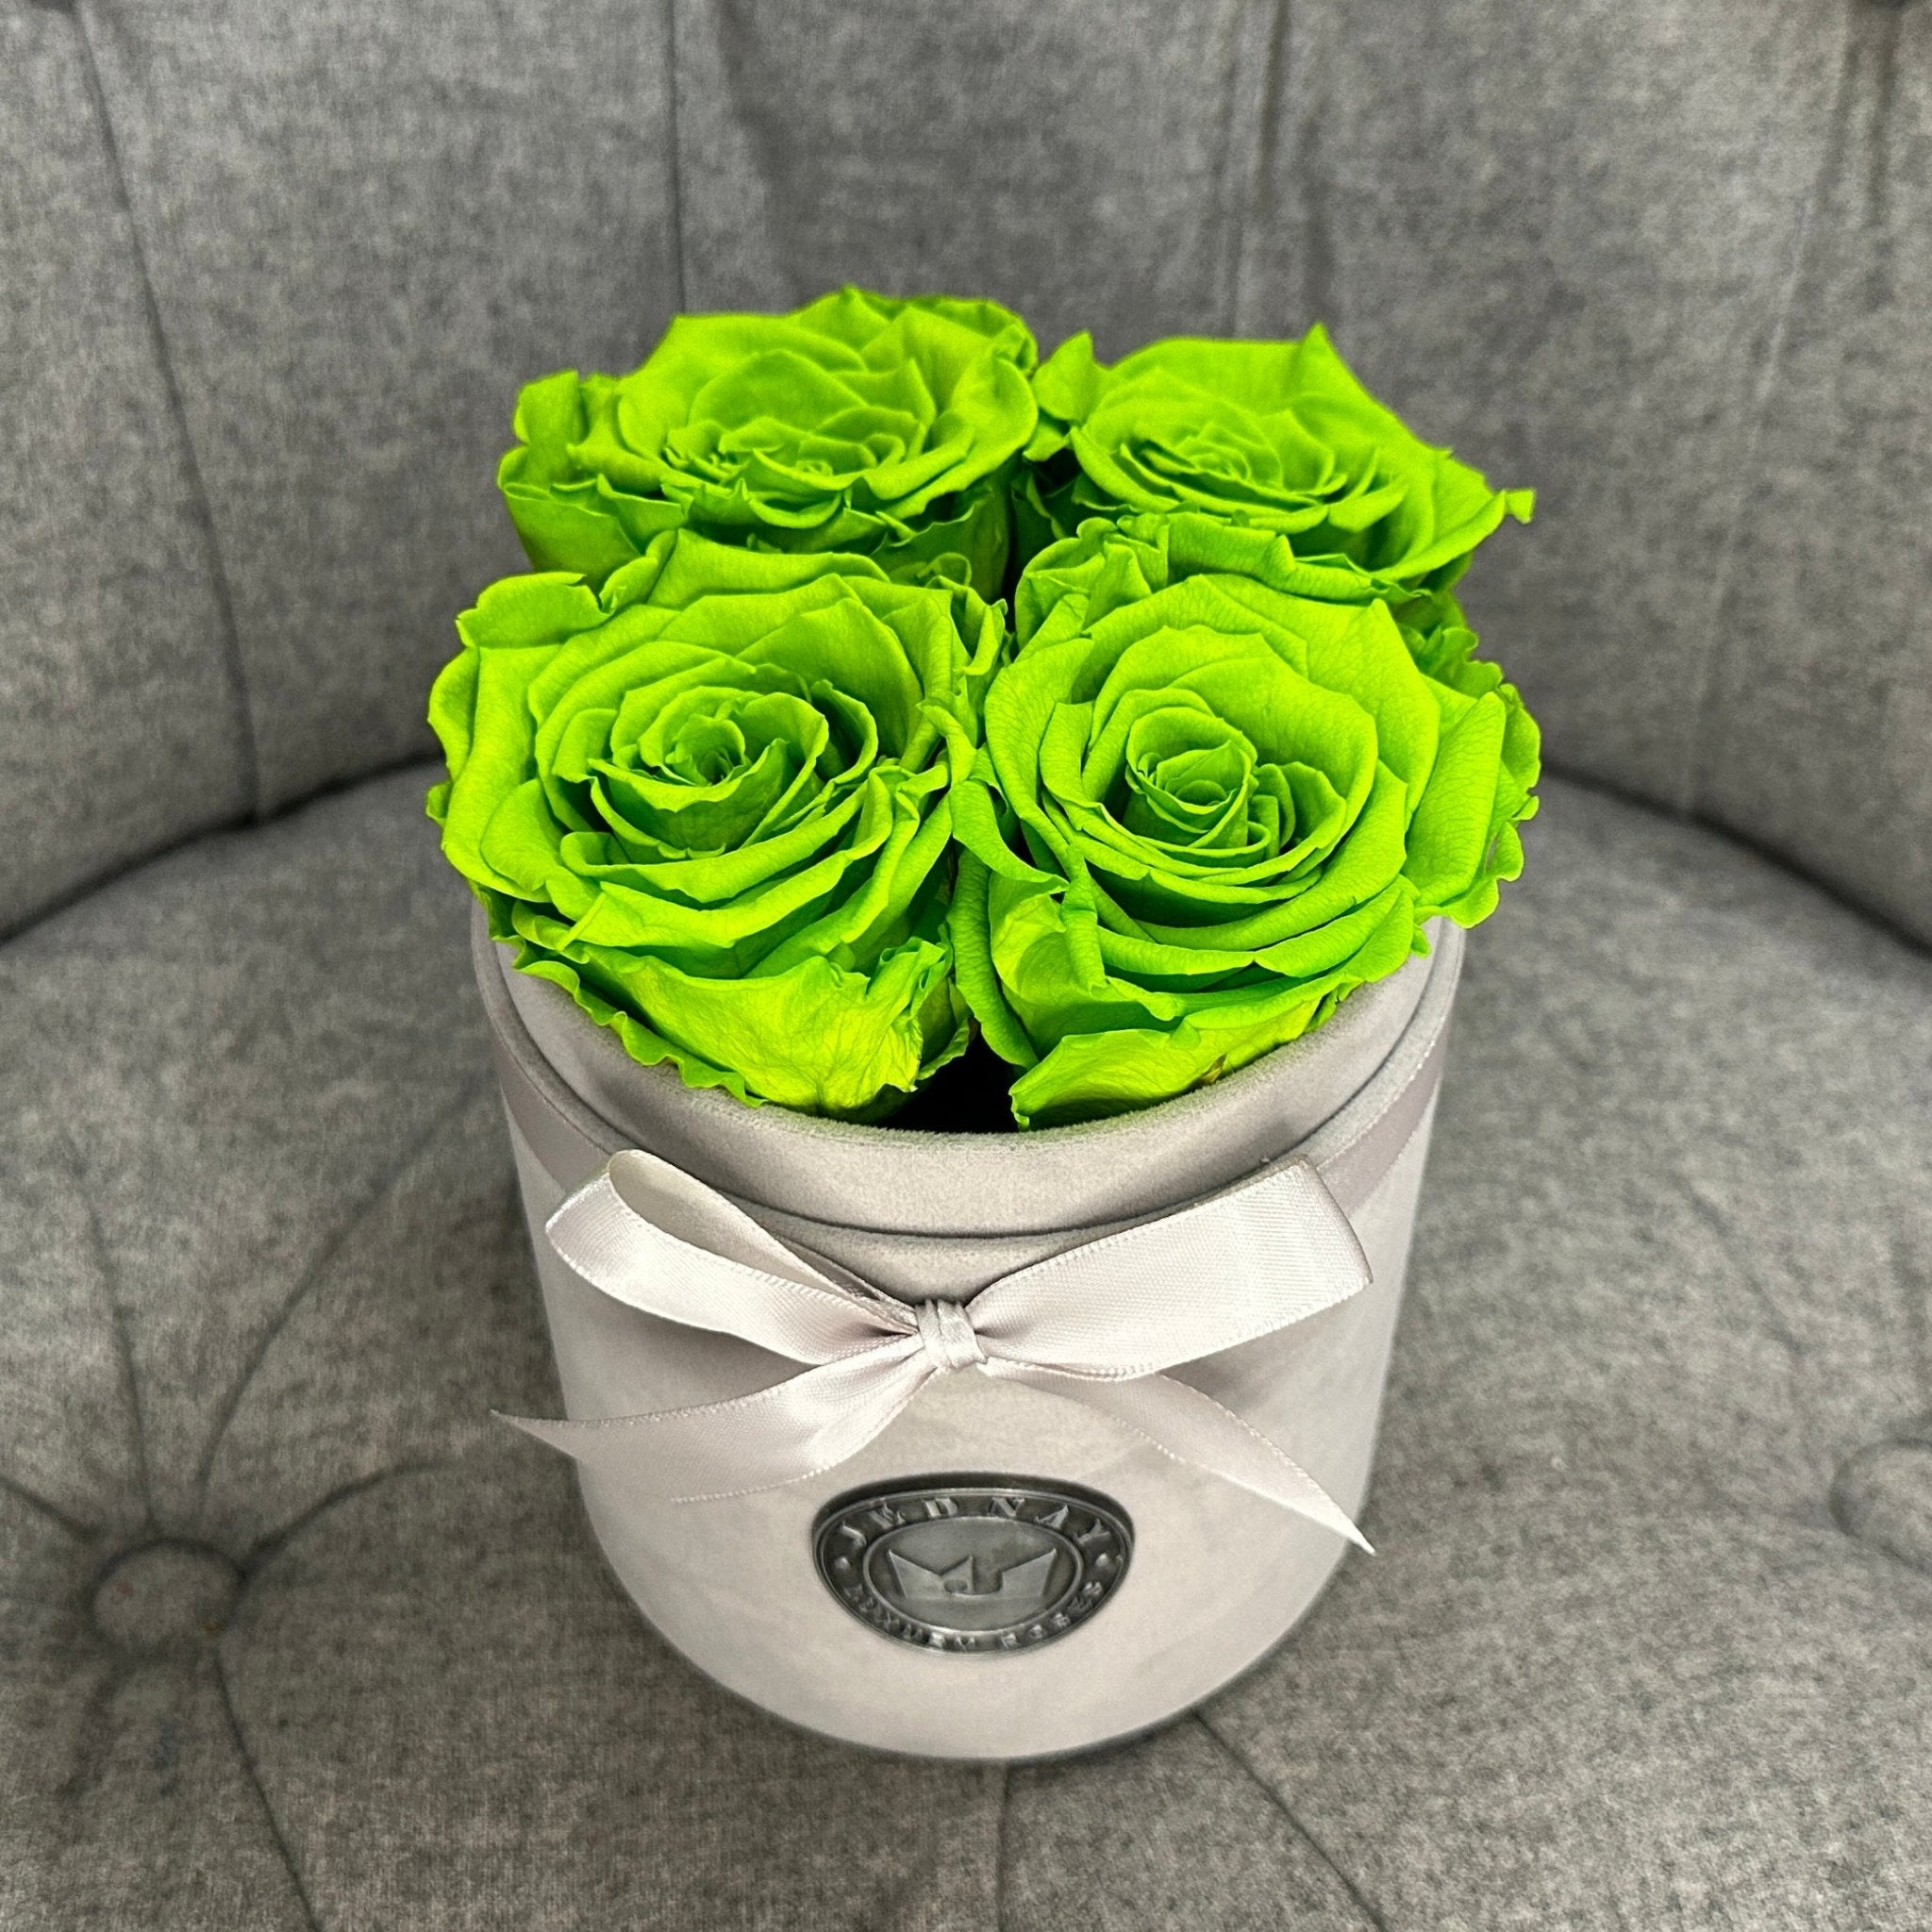 Petite Grey Suede Forever Rose Box - Limeade Eternal Roses - Jednay Roses